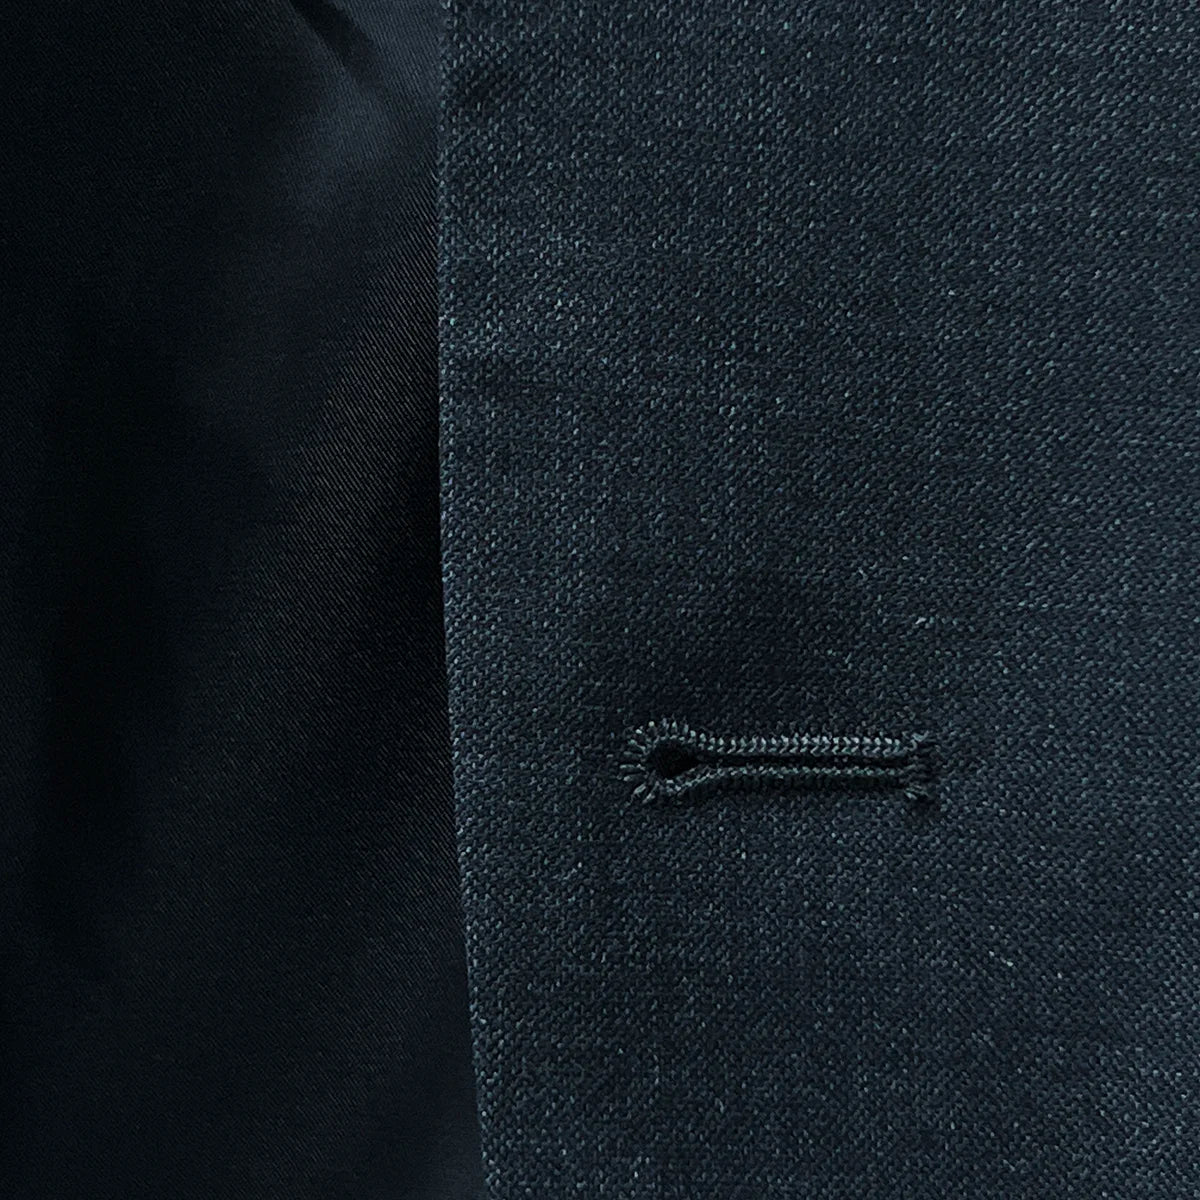 Close-up view of buttonhole detailing on a dark gray sharkskin suit.